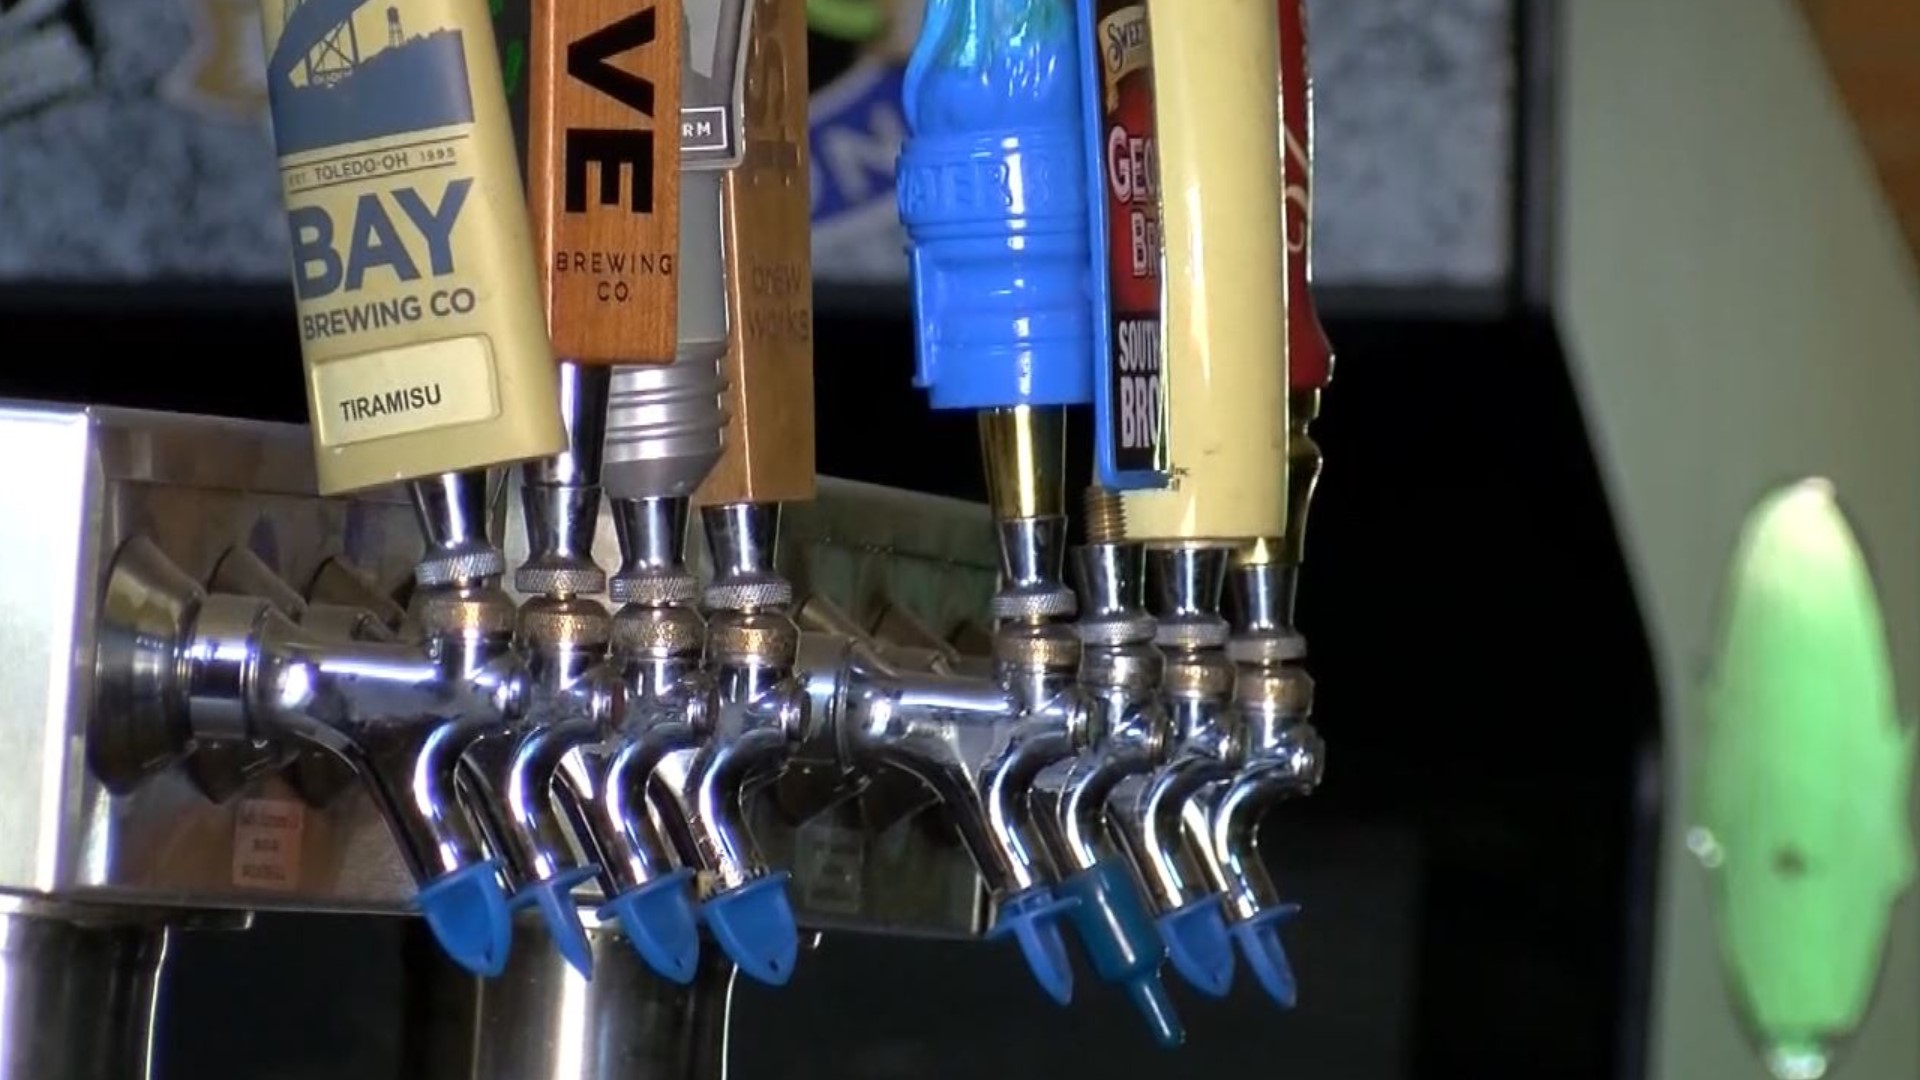 Bar workers and customers believe bars will take a hit from a new health order, but prefer the option of limited hours versus a complete shutdown.